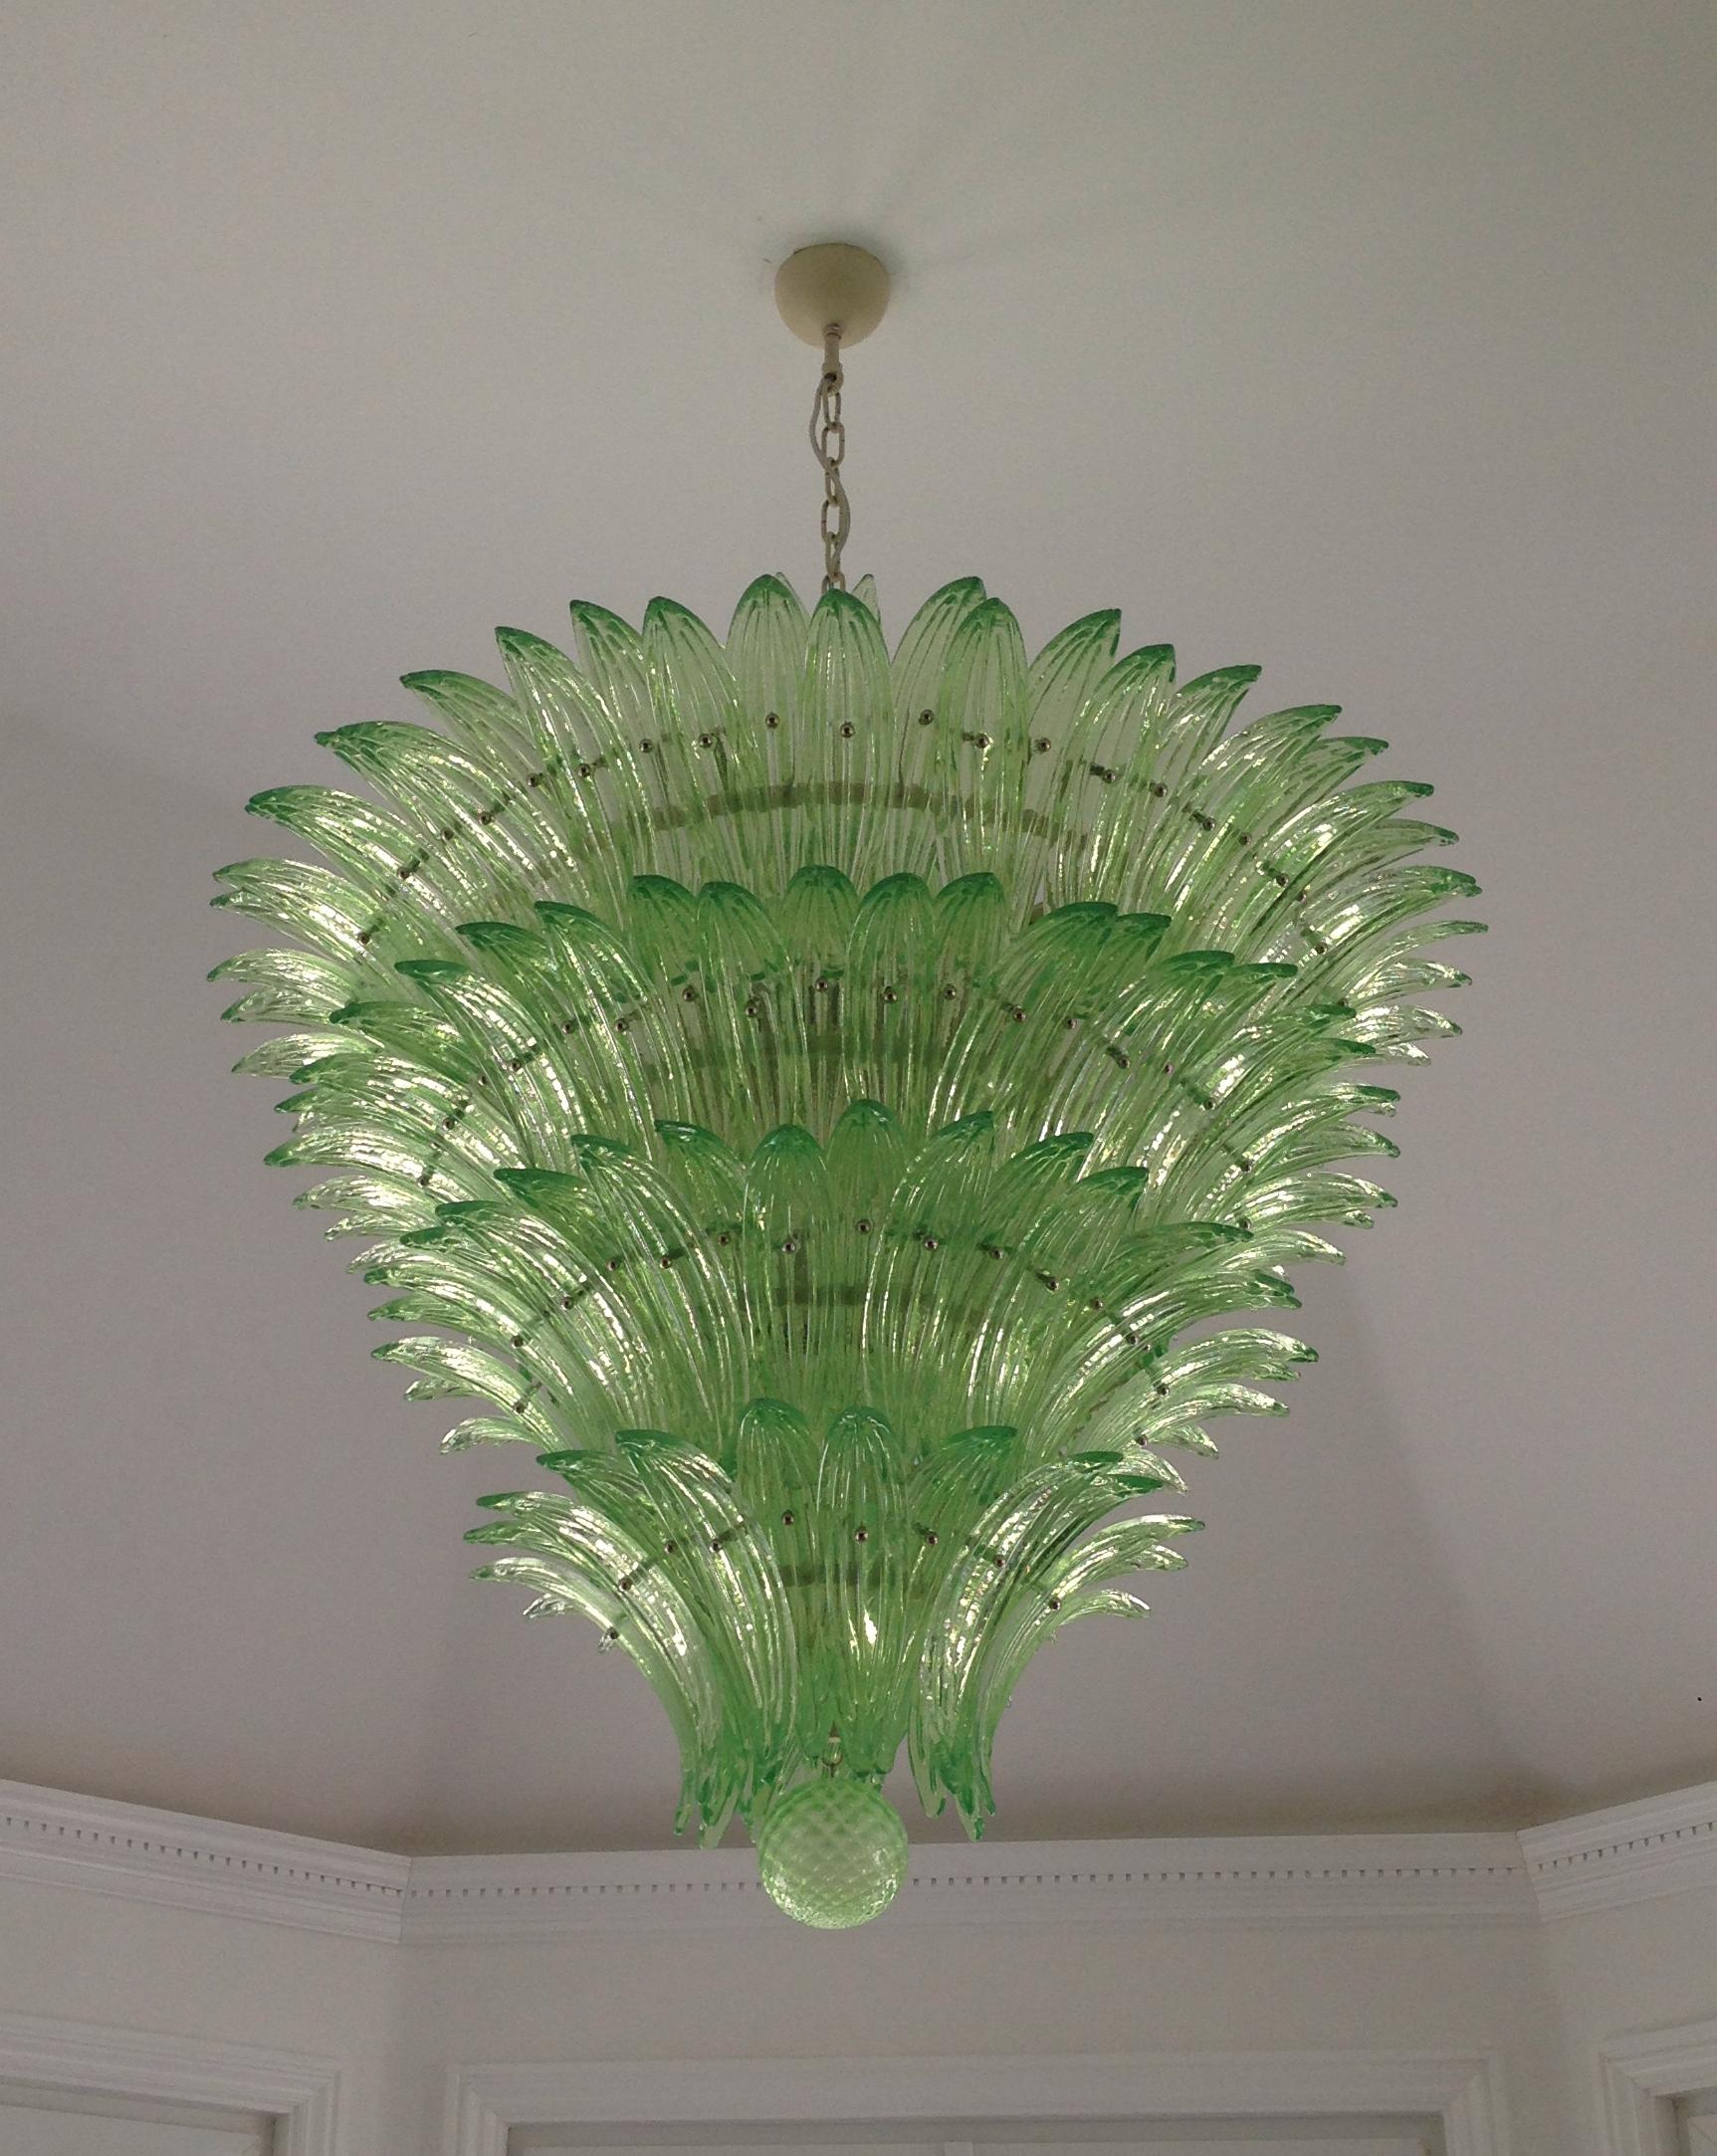 A must have for a magnificent focal point! This chandelier features more than 150 handmade textured green Murano glass palmettes all resting on a structurally beautiful five tier handmade metal skeleton. The glass palmettes are individually placed